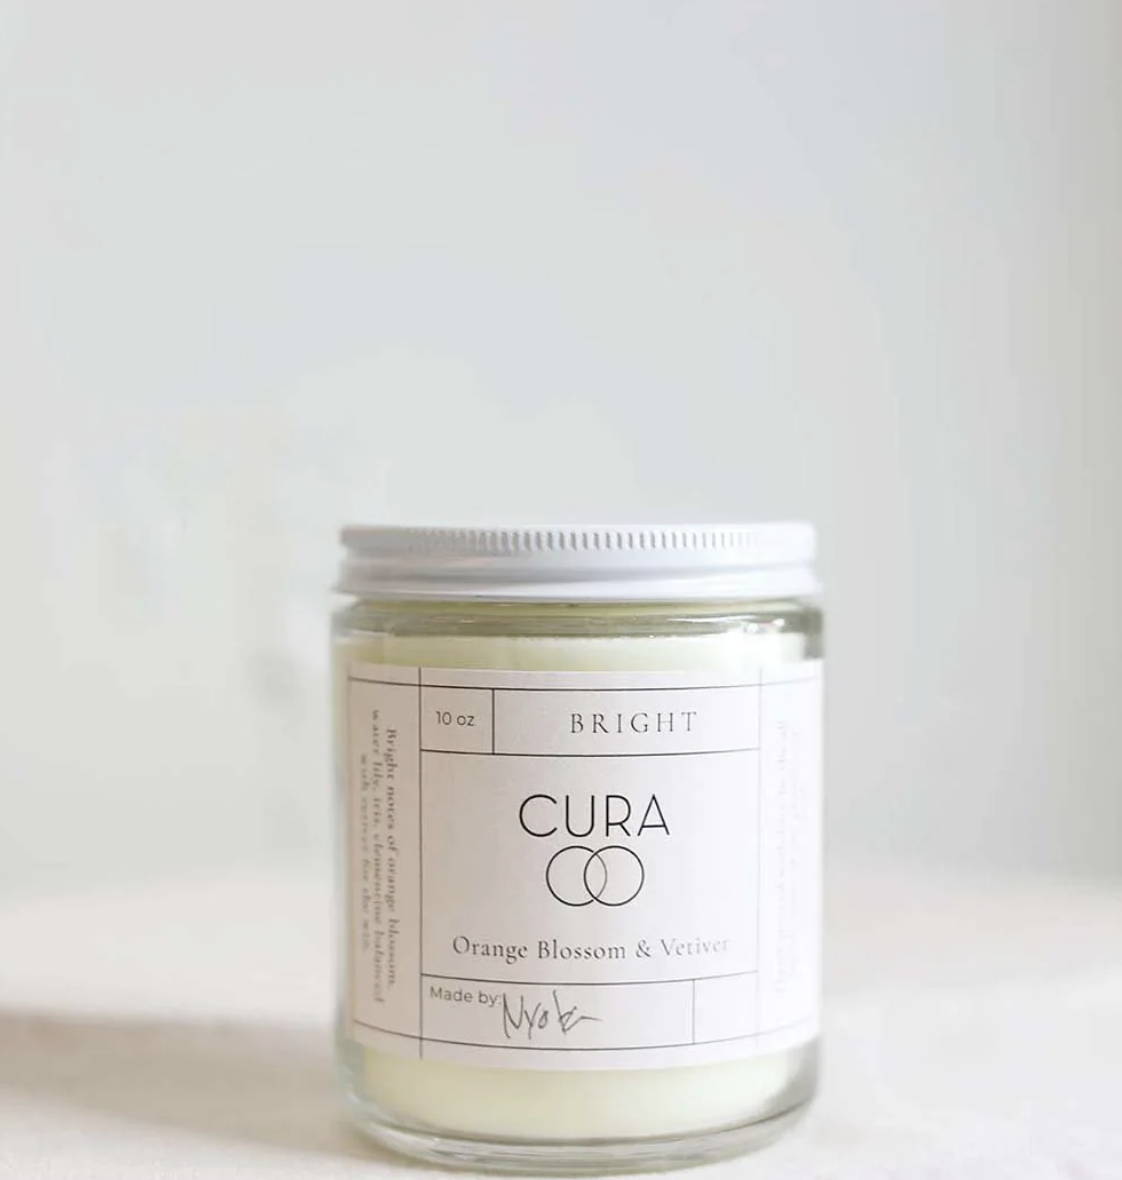 Cura Moon Notes. The Cura Co sustainable candle orange blossom & vetiver,  ethically made using fair trade practices to support refugees and women artisans 